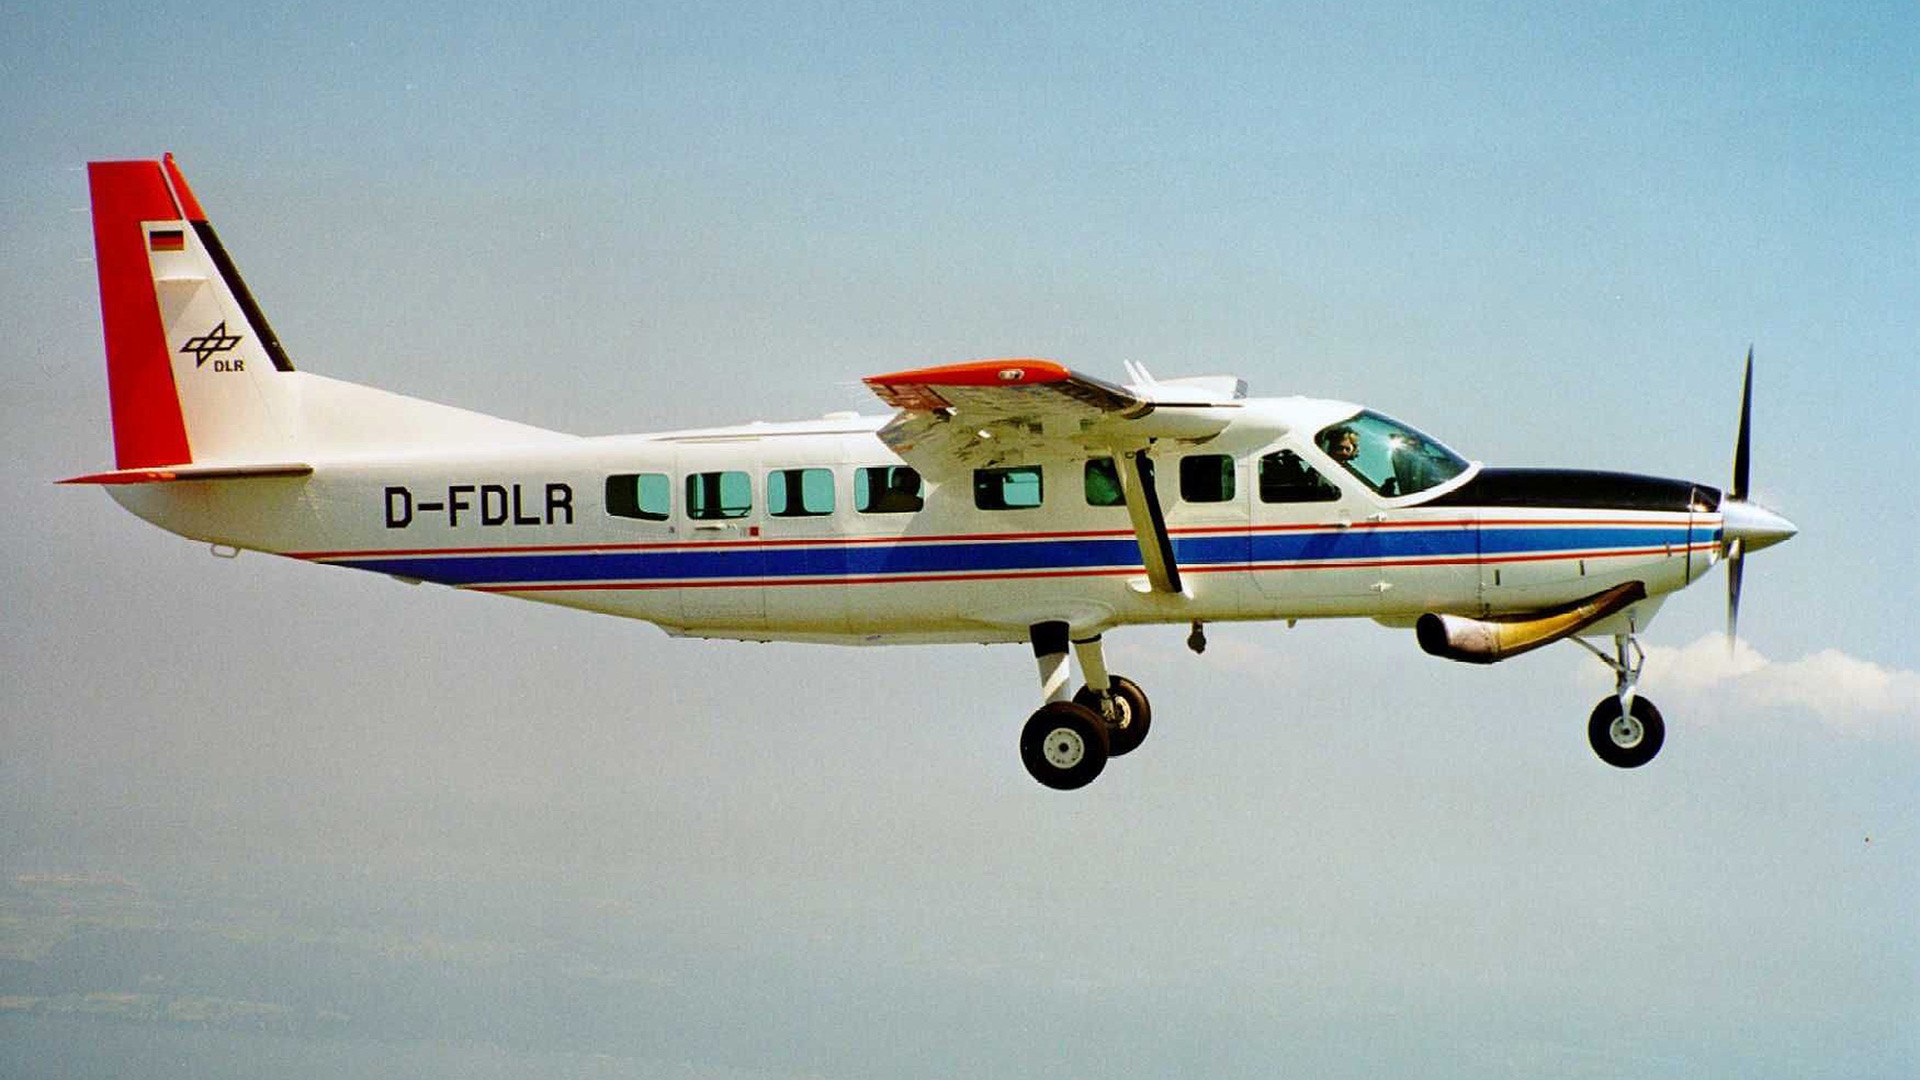 The DLR Cessna 208 research plane